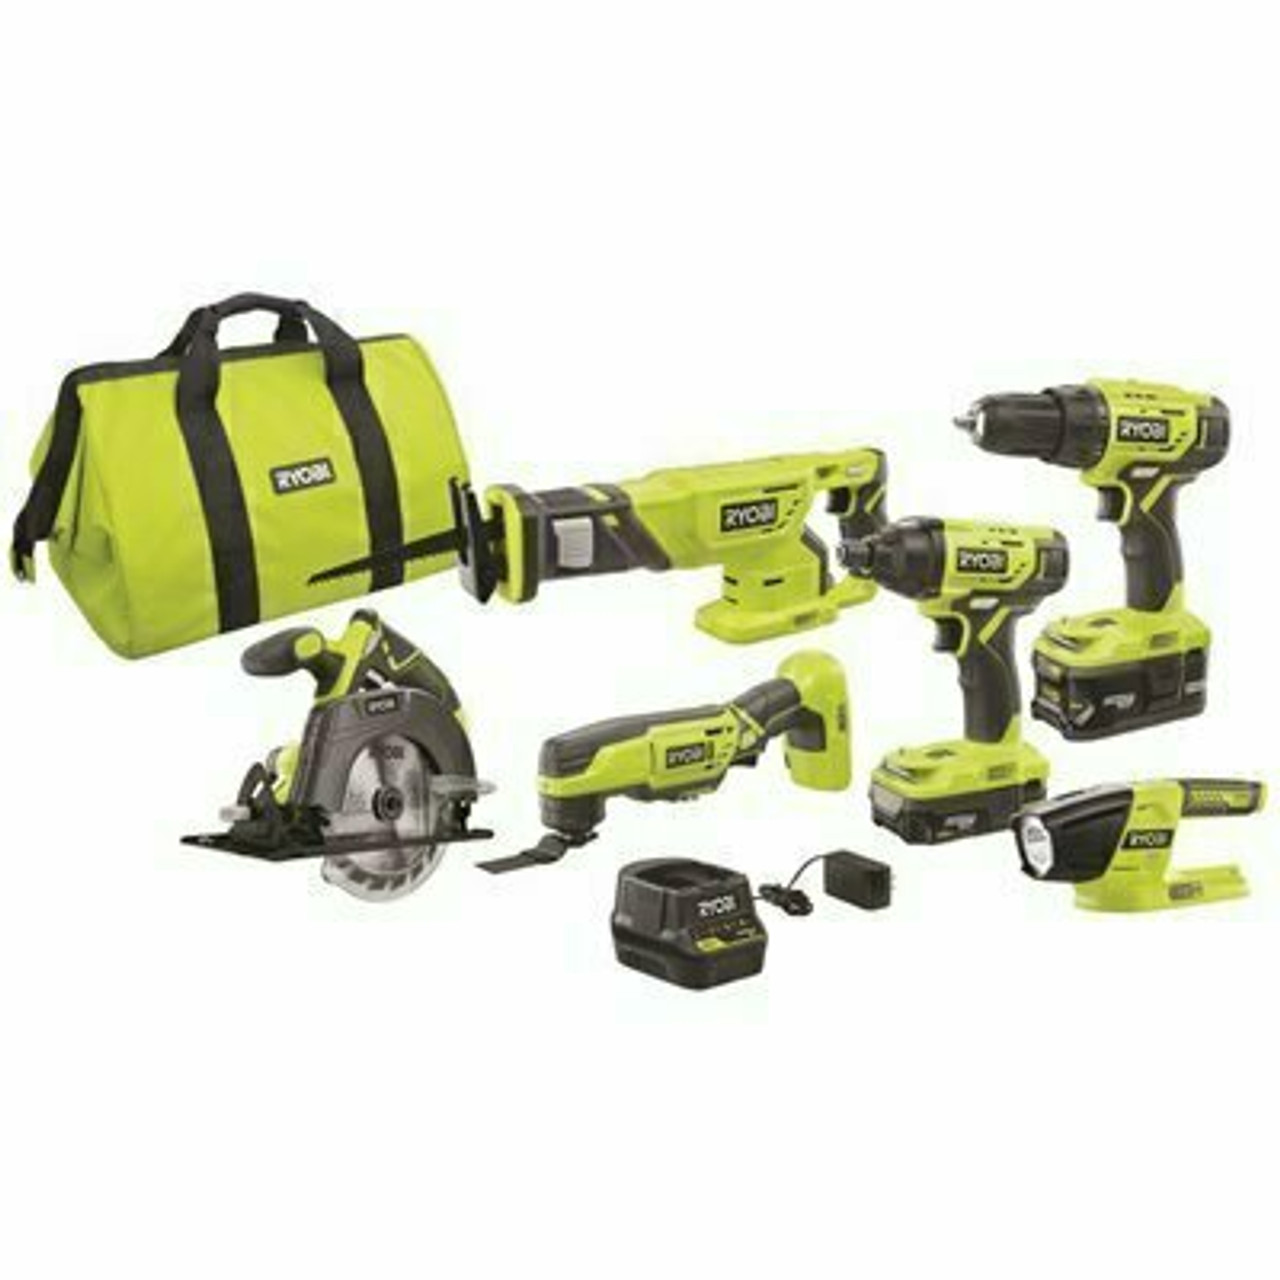 Ryobi One+ 18V Lithium-Ion Cordless 6-Tool Combo Kit With (2) Batteries, Charger, And Bag